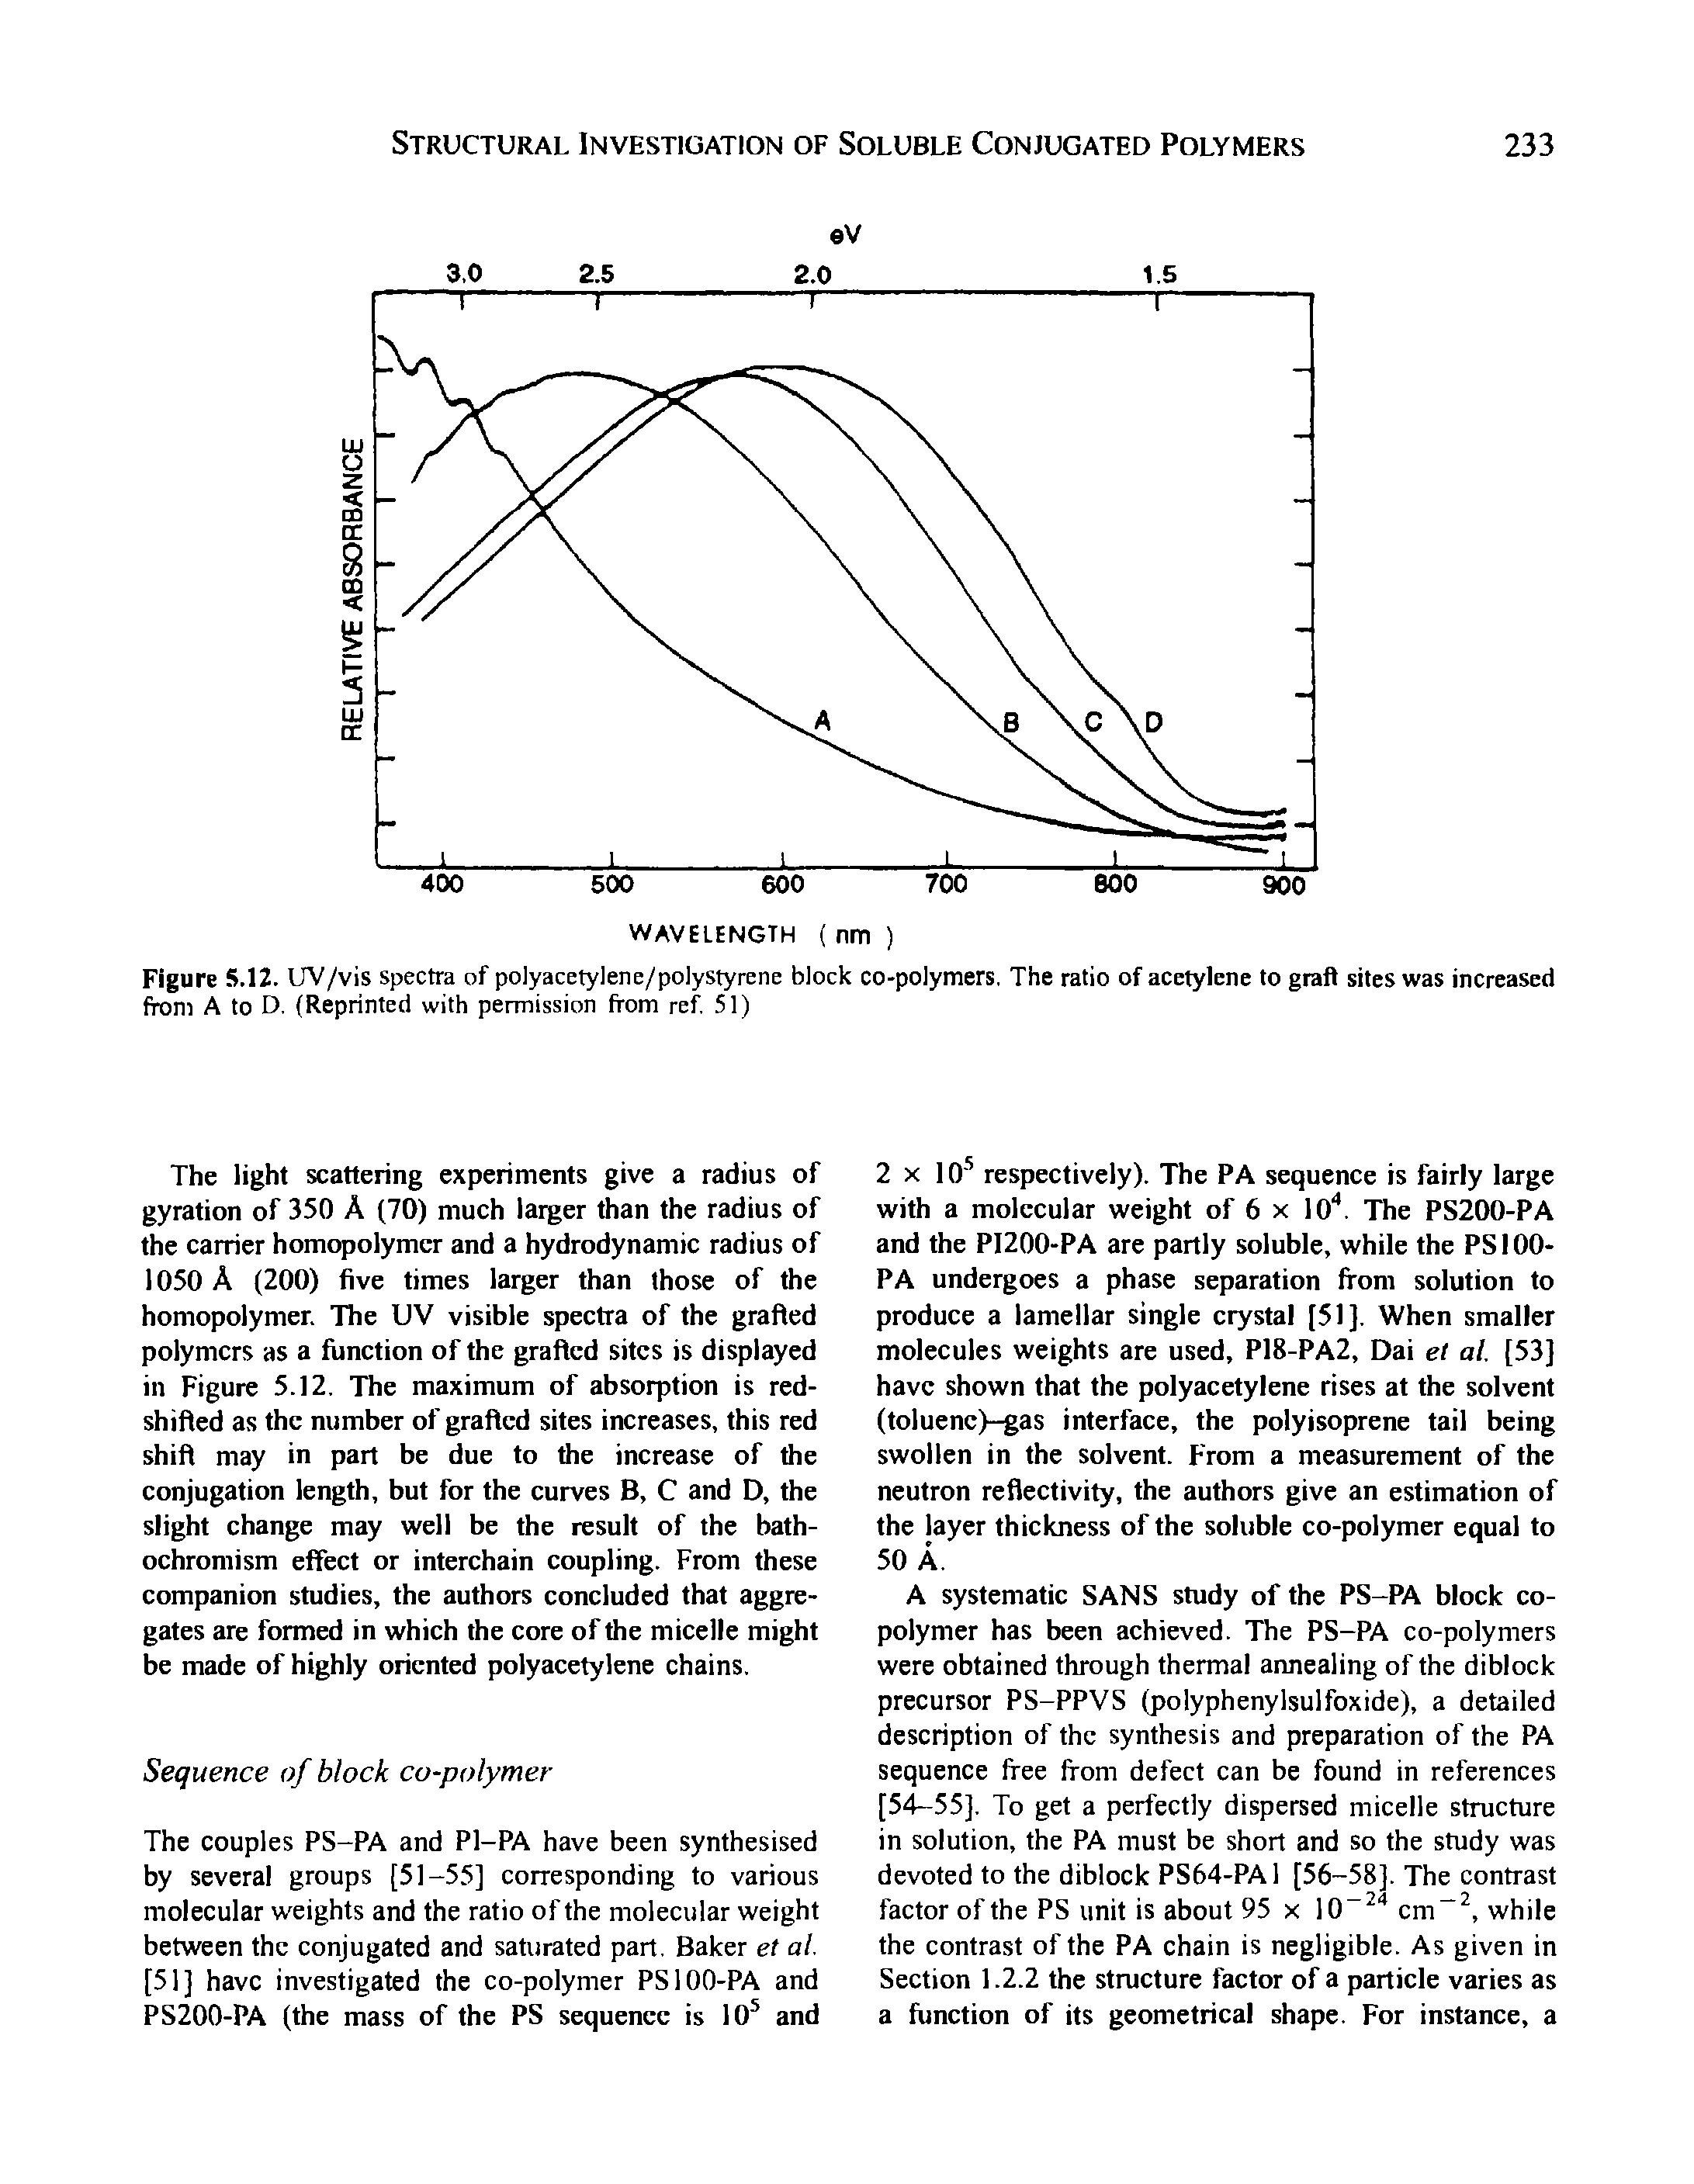 Figure 5.12. UV/vis spectra of polyacetylene/polystyrene block co-polymers, The ratio of acetylene to graft sites was increased from A to D. (Reprinted with permission from ref. 51)...